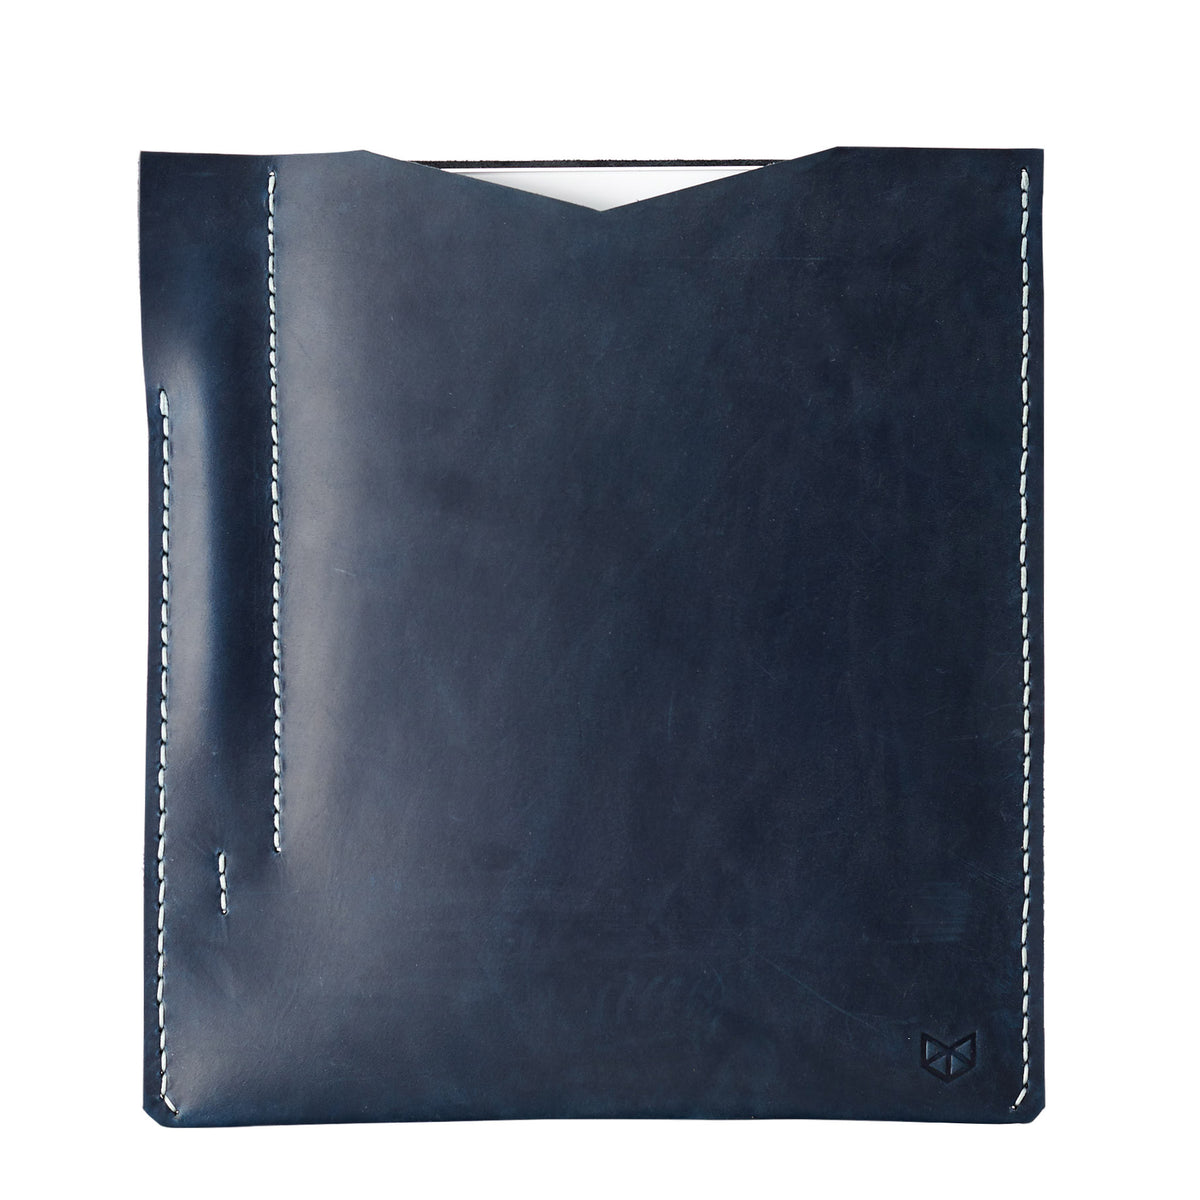 Ocean blue leather sleeve for iPad pro 10.5 inch 12.9 inch. Mens gifts